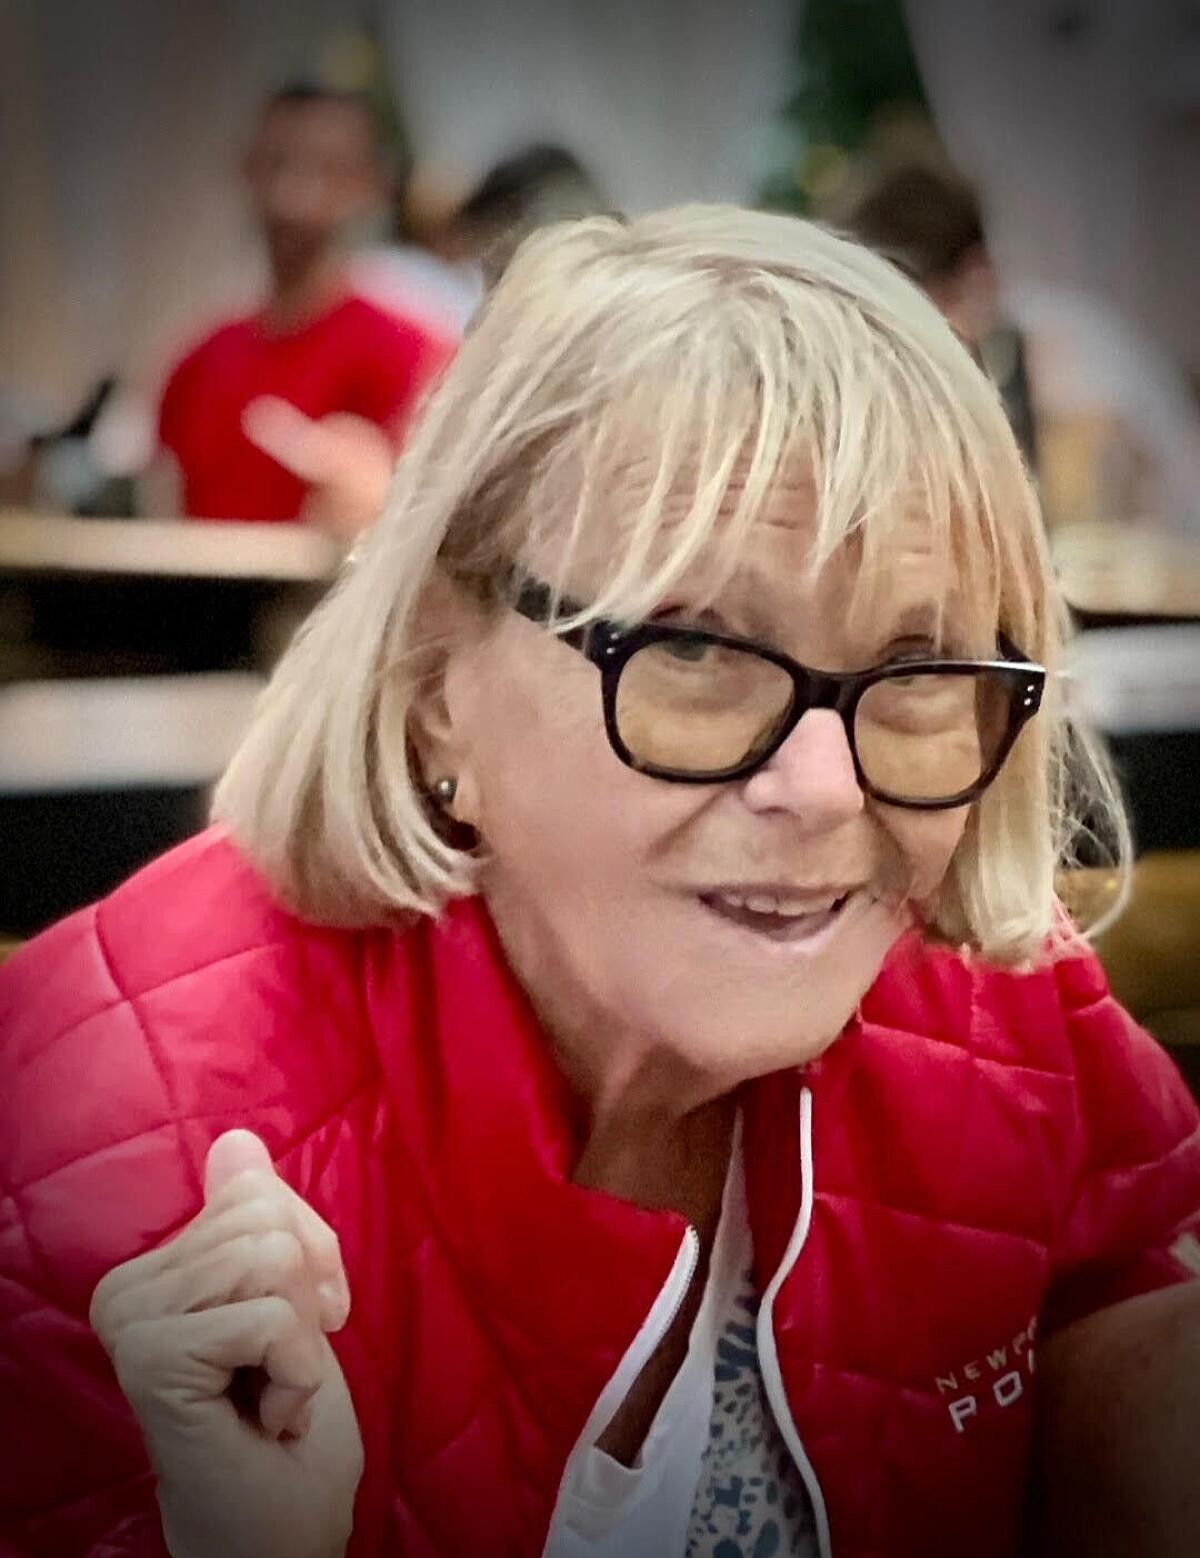 Genevieve Lane wearing glasses and a red jacket.